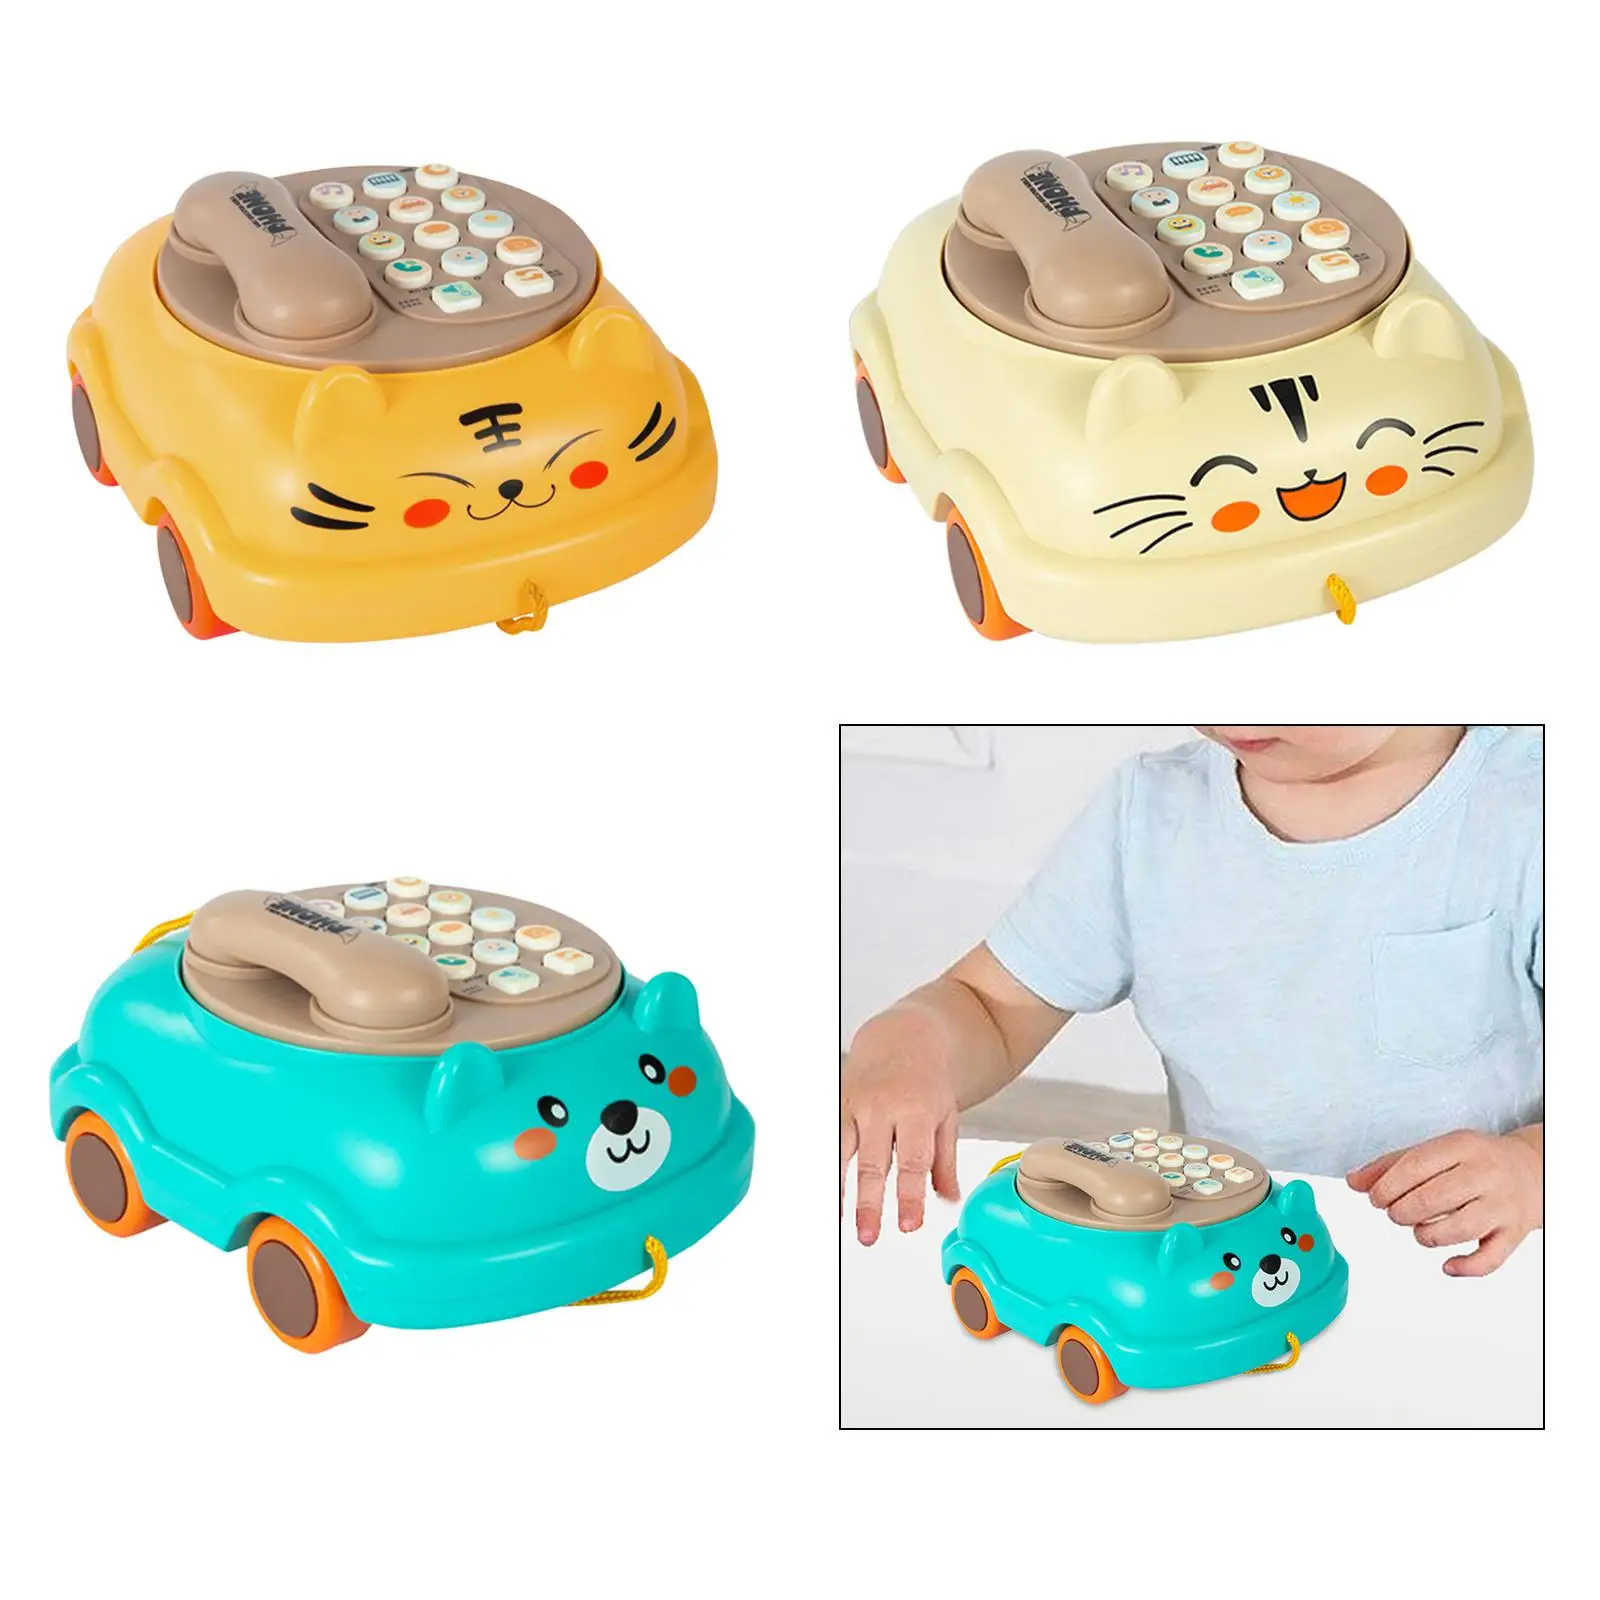 Kid Phone Baby Educational Learning Toy for Preschool Educational Learning Creative Gift Early Education Gift Boys 3 Years Old